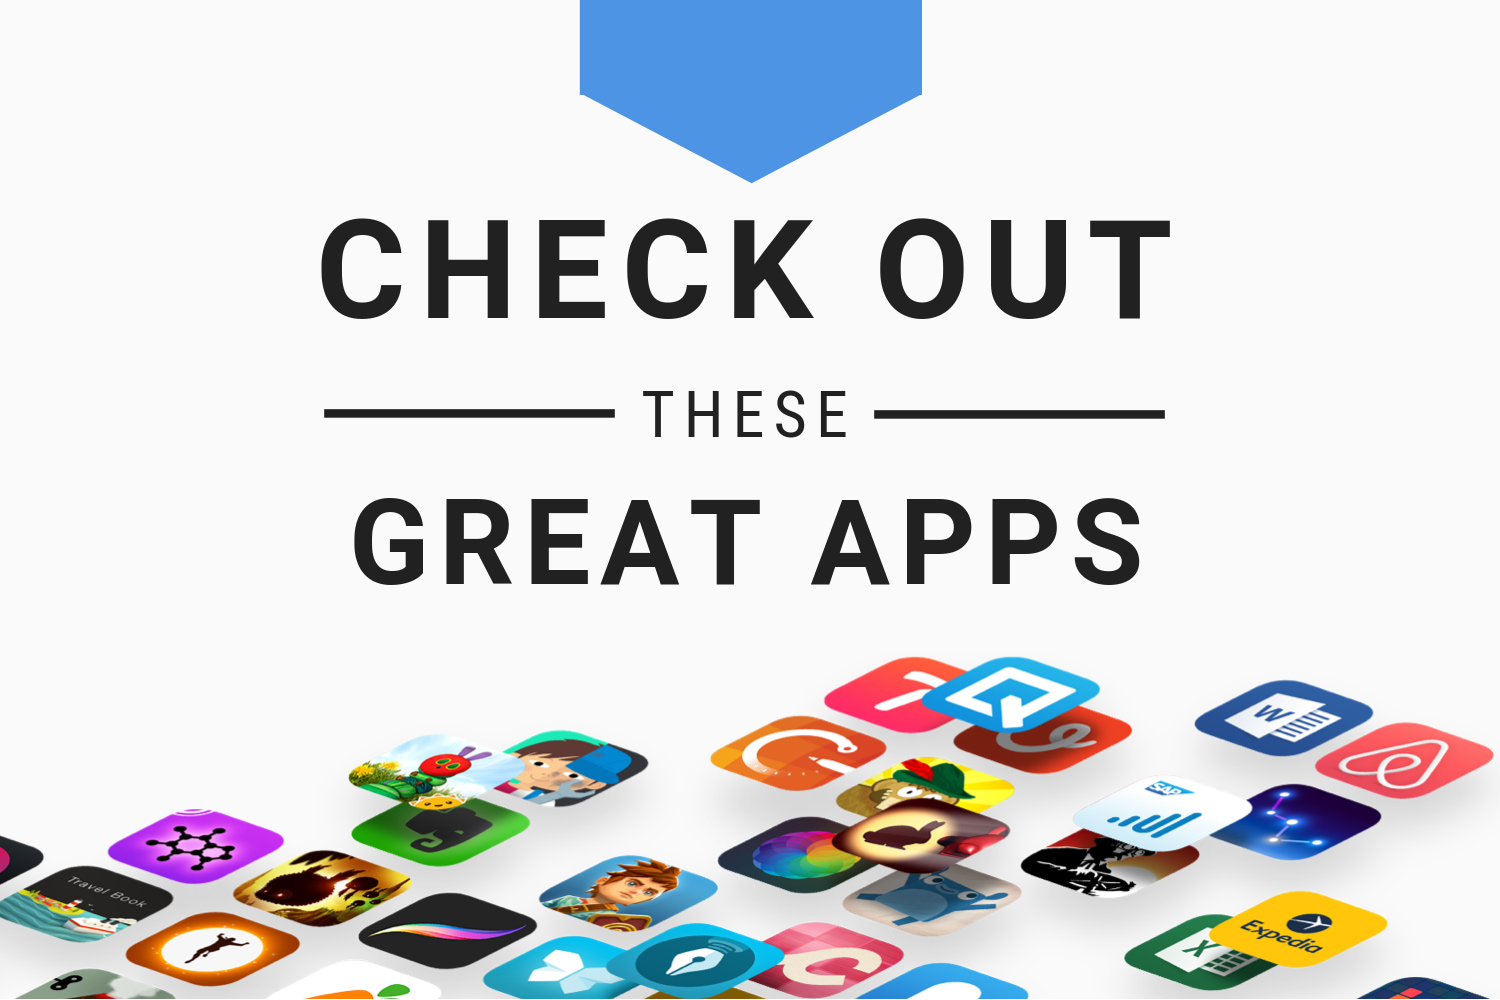 David's Disposable, Cinemeet, Primalist, and other apps to check out this weekend